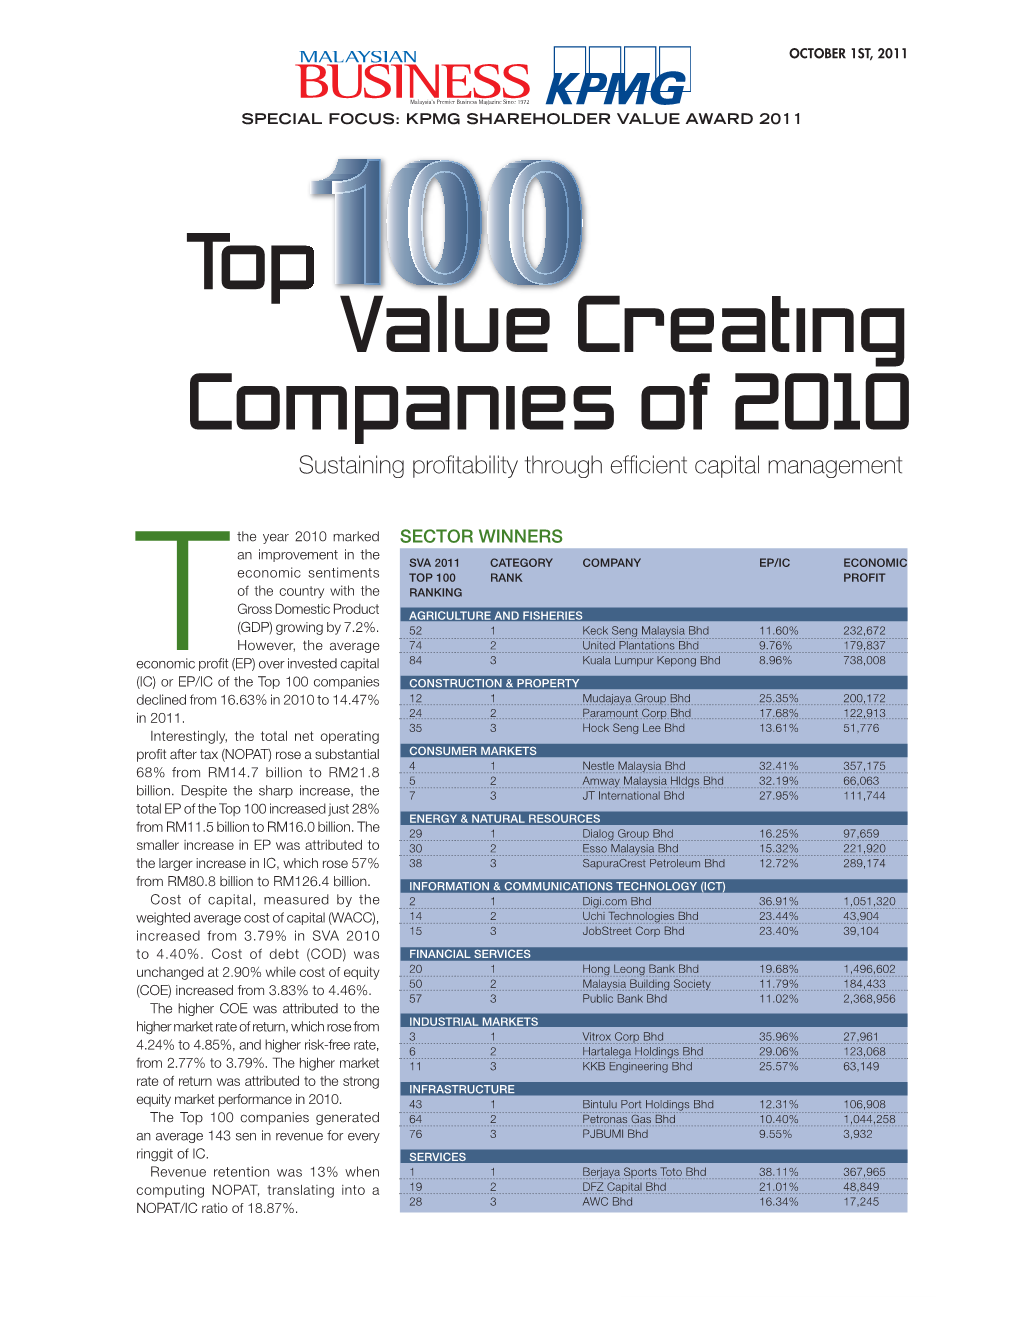 Value Creating Top Companies of 2010